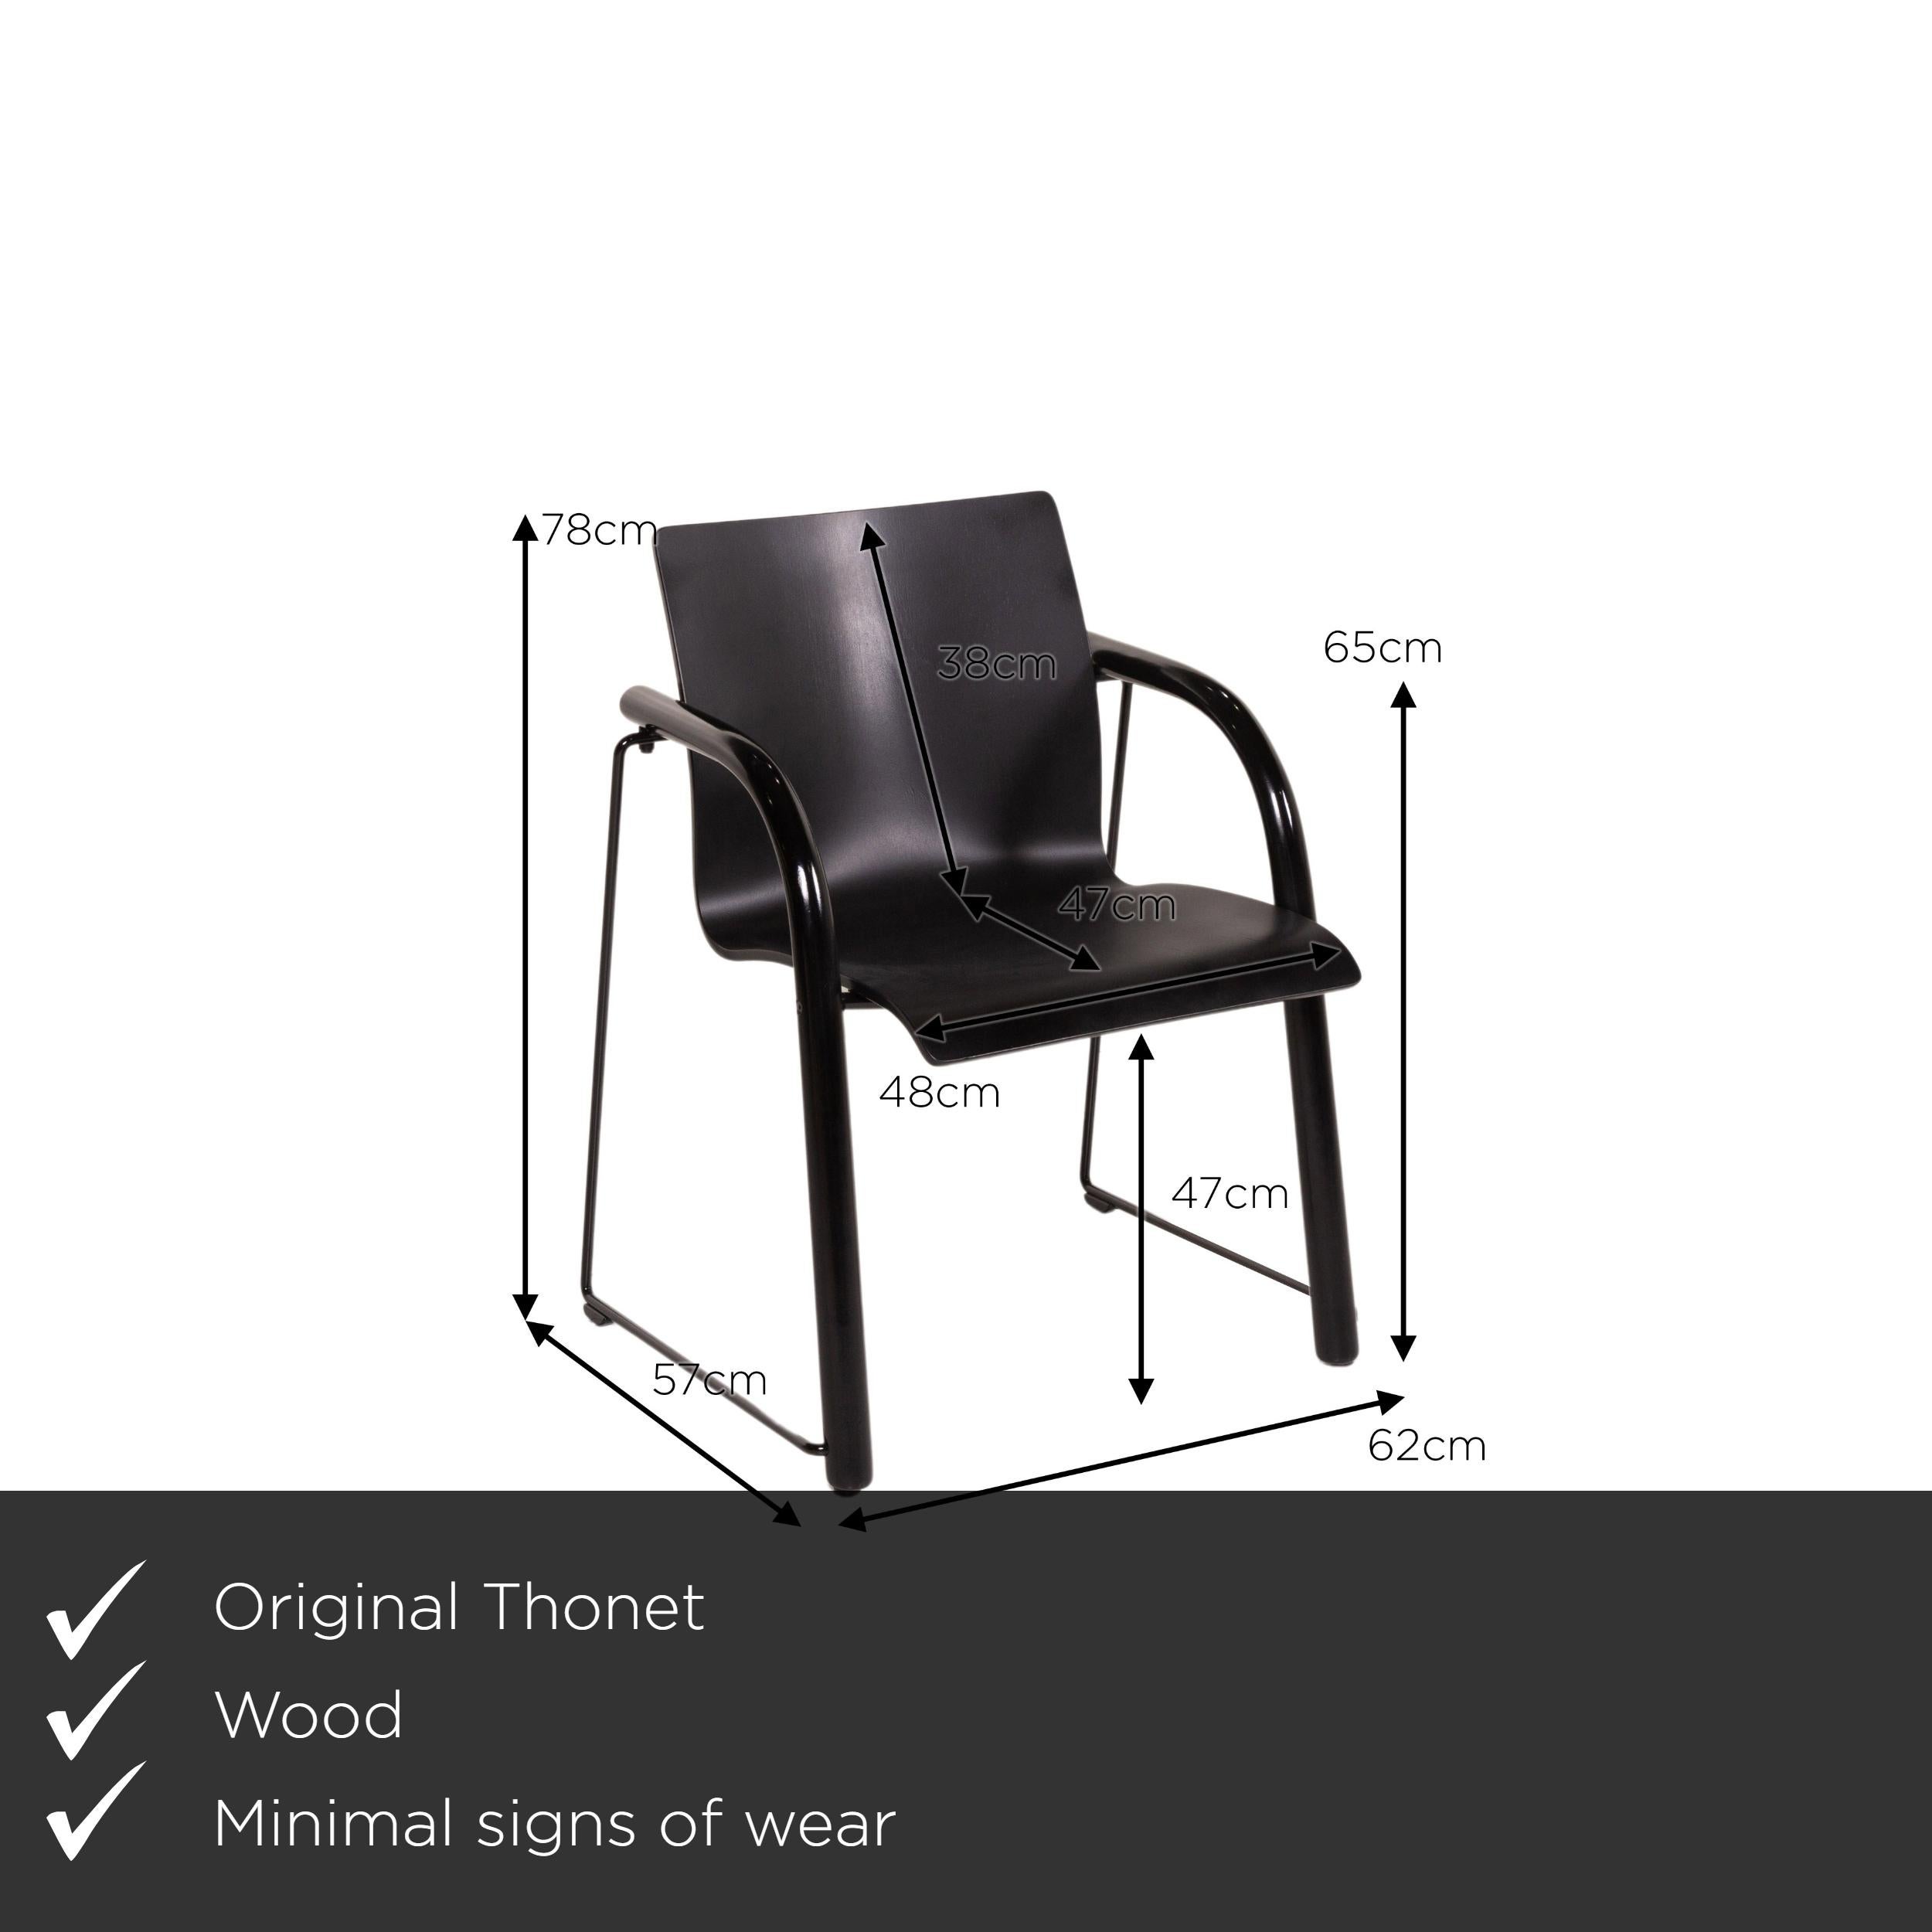 We present to you a Thonet S320 wood chair black.
 SKU: #15885-c2
 

 Product measurements in centimeters:
 

Depth 57
Width 62
Height 78
Seat height 46
Rest height 65
Seat depth 47
Seat width 48
Back height 38.